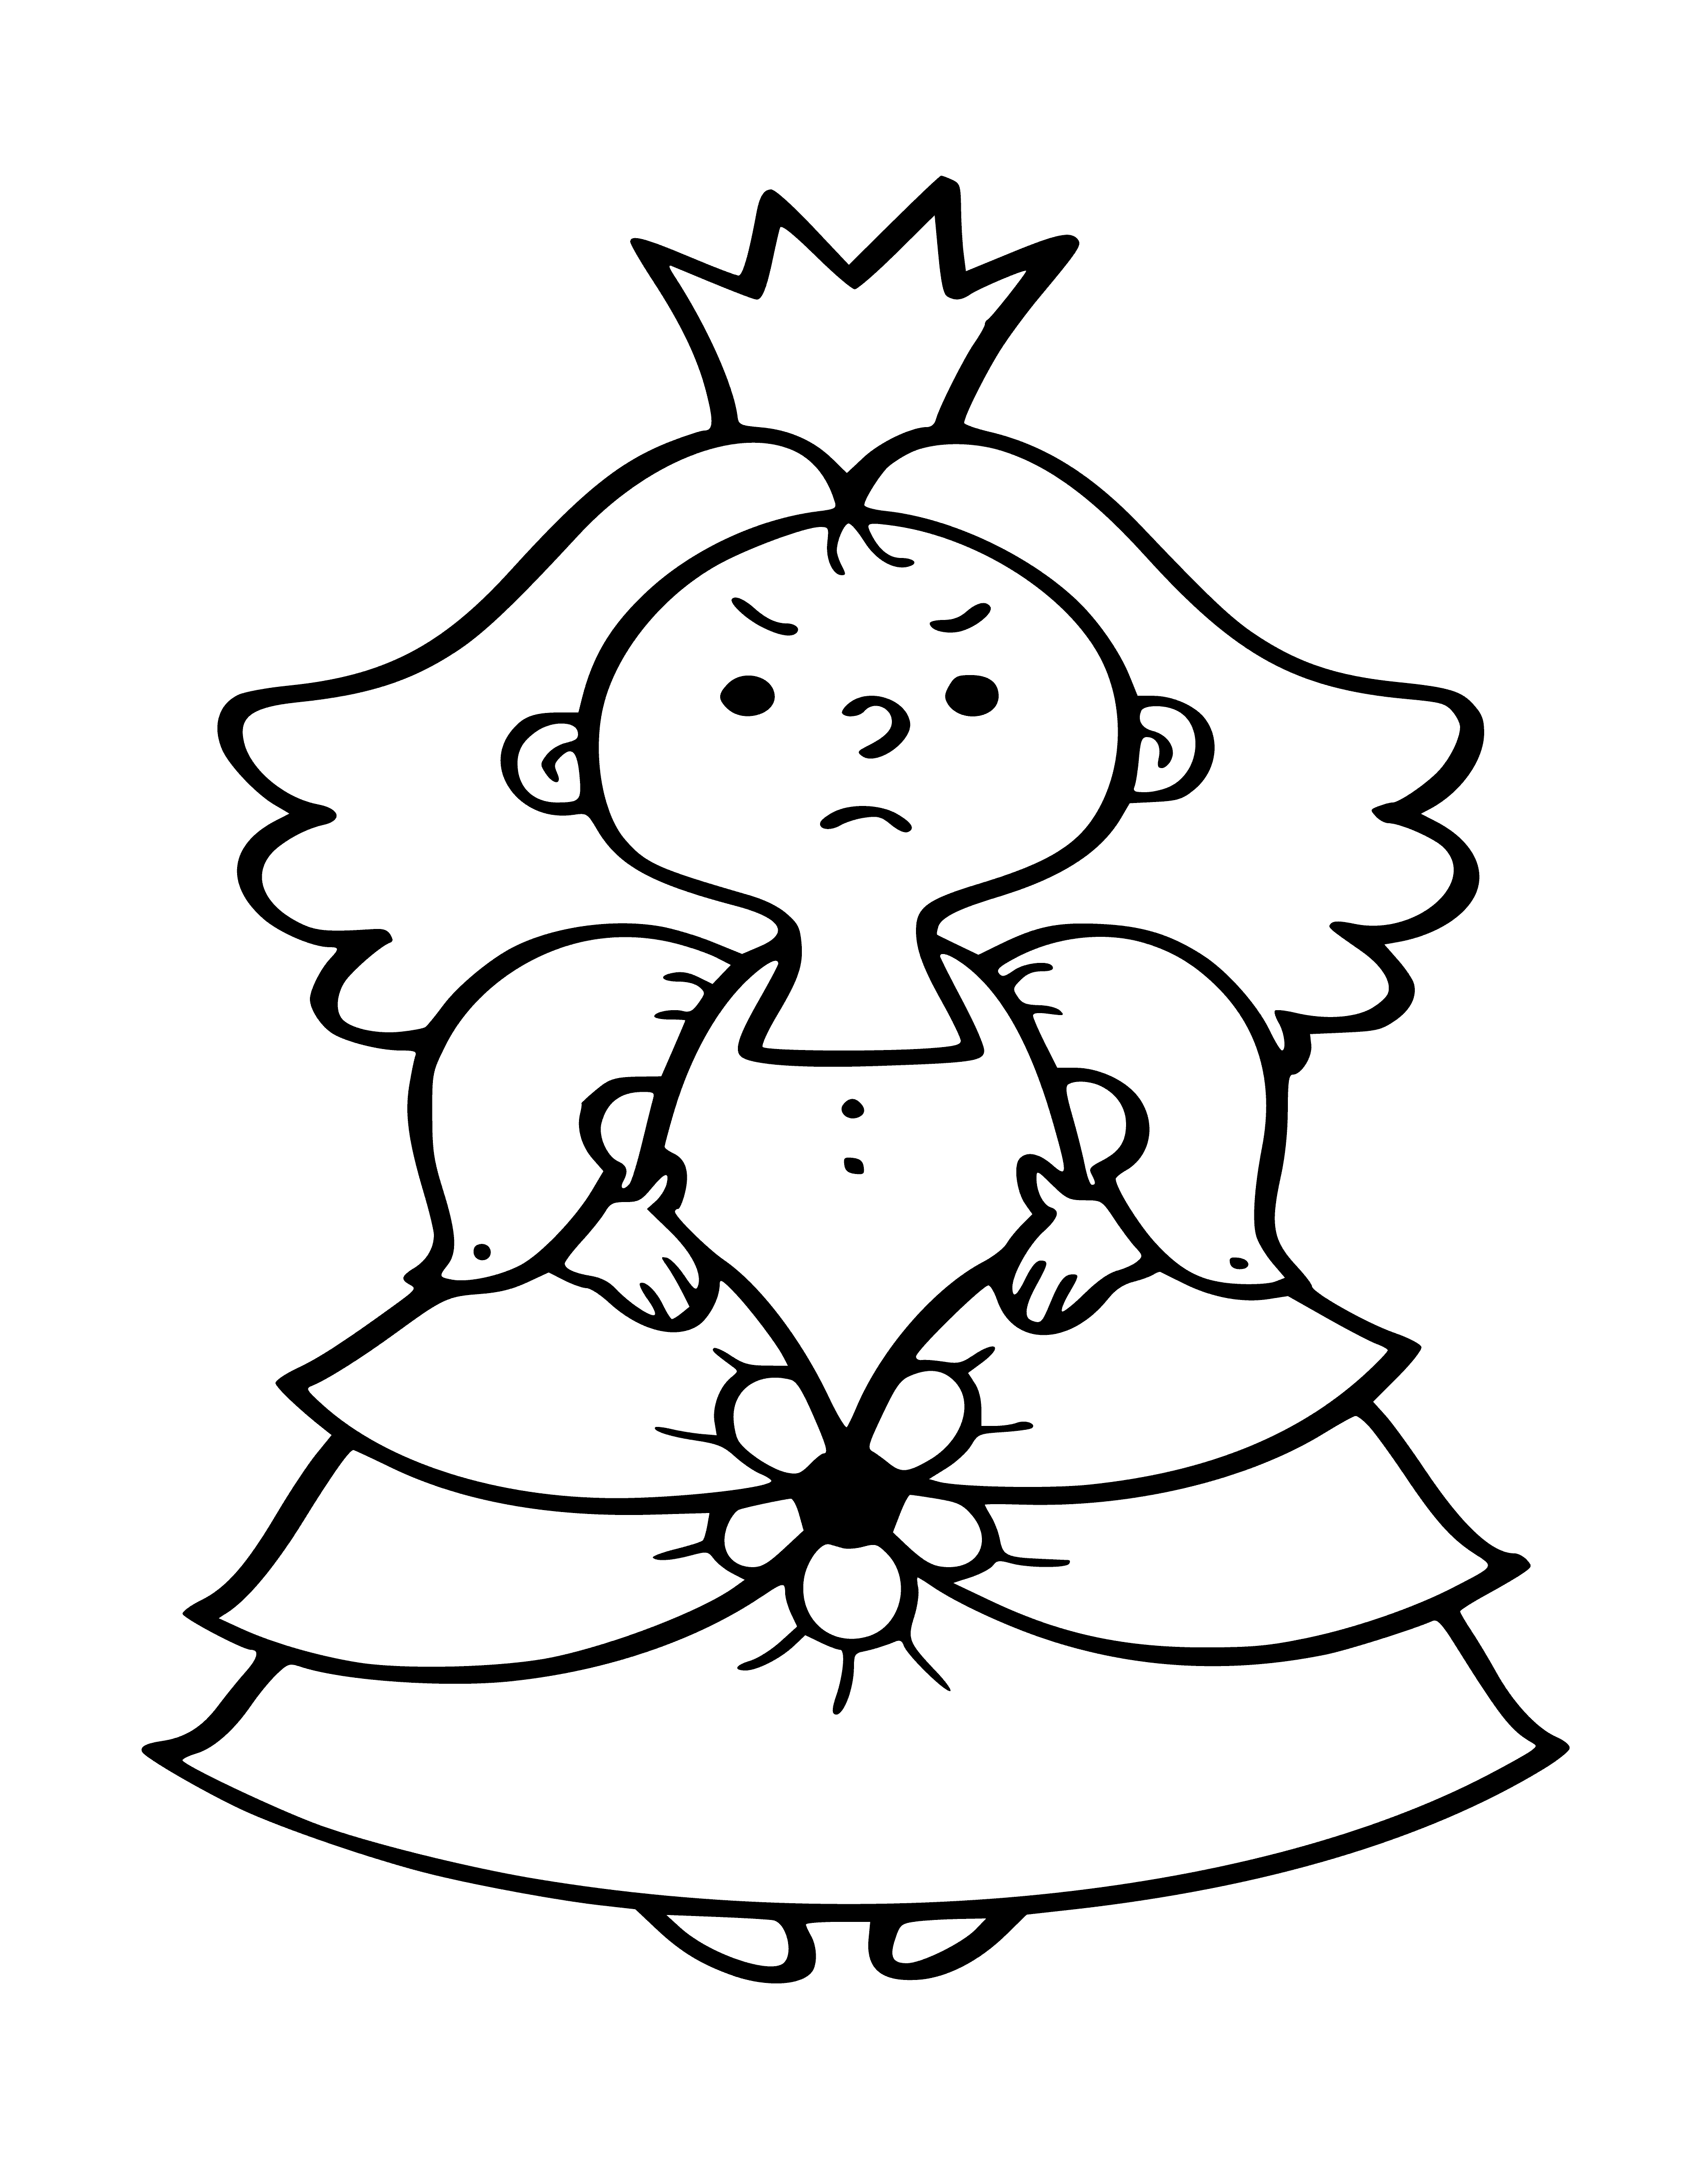 coloring page: Two tiny kings wearing crowns, one standing and one kneeling, laugh with open-mouth grins. #kings#laughing